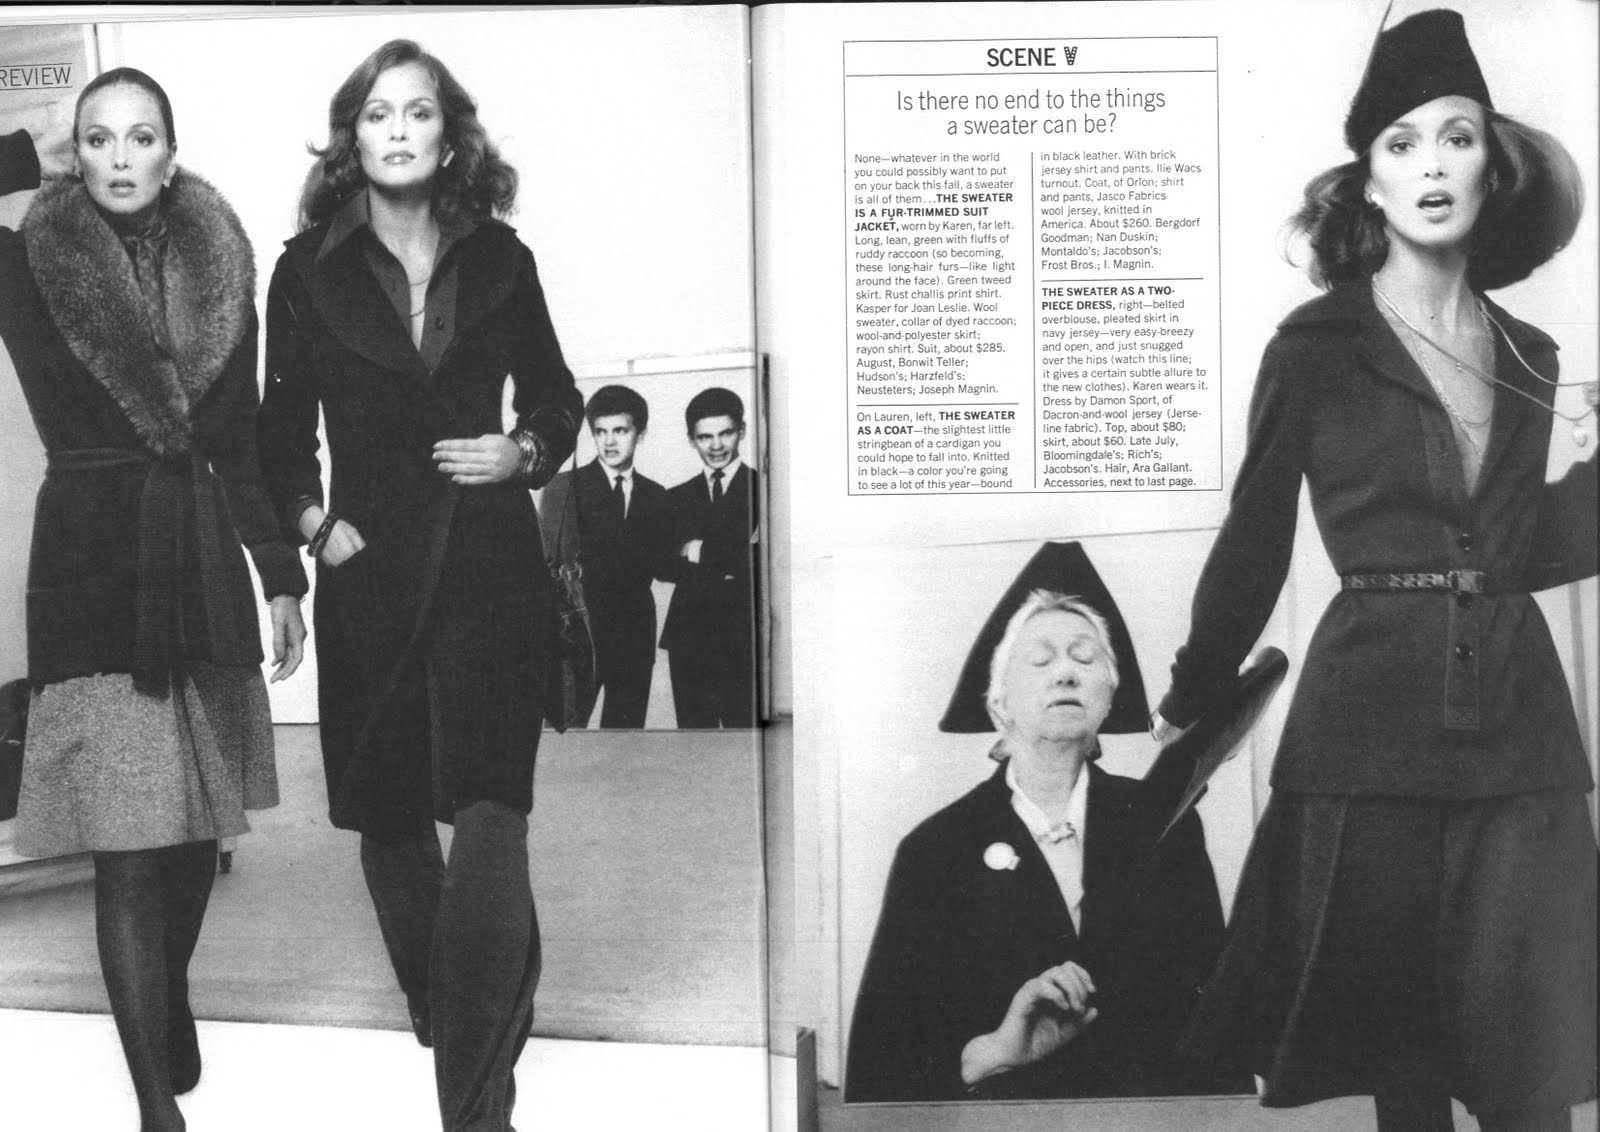 youthquakers: July 1973 - US Vogue